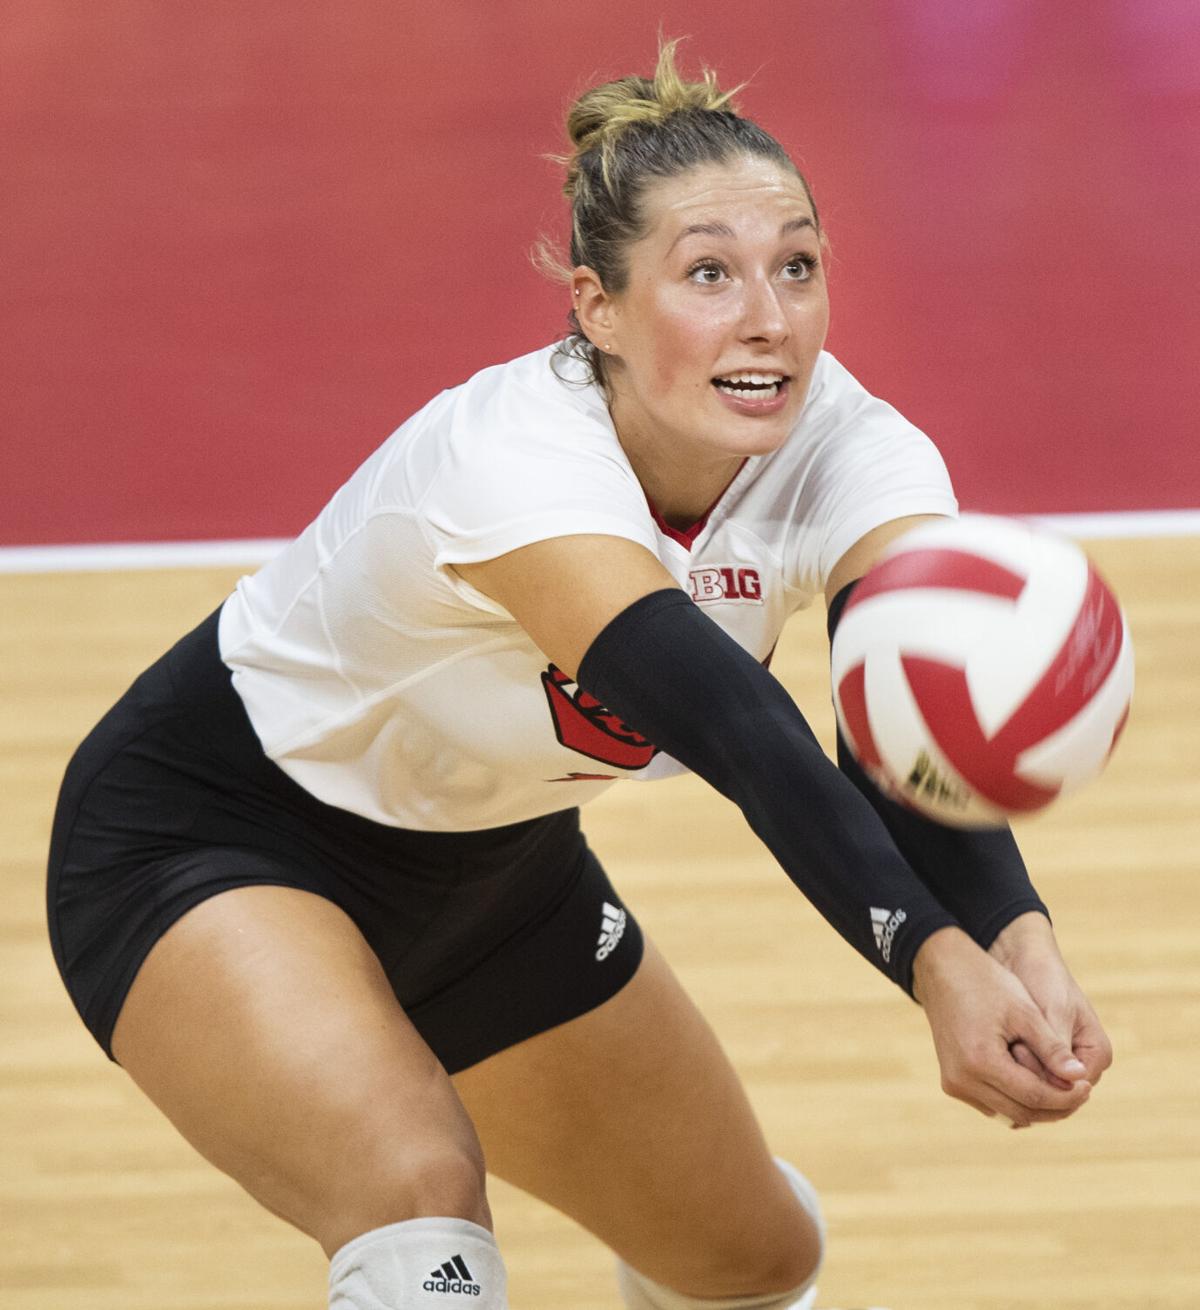 Why Kayla Banwarth says bringing Mississippi to Lincoln to play Nebraska is  a 'no-brainer'